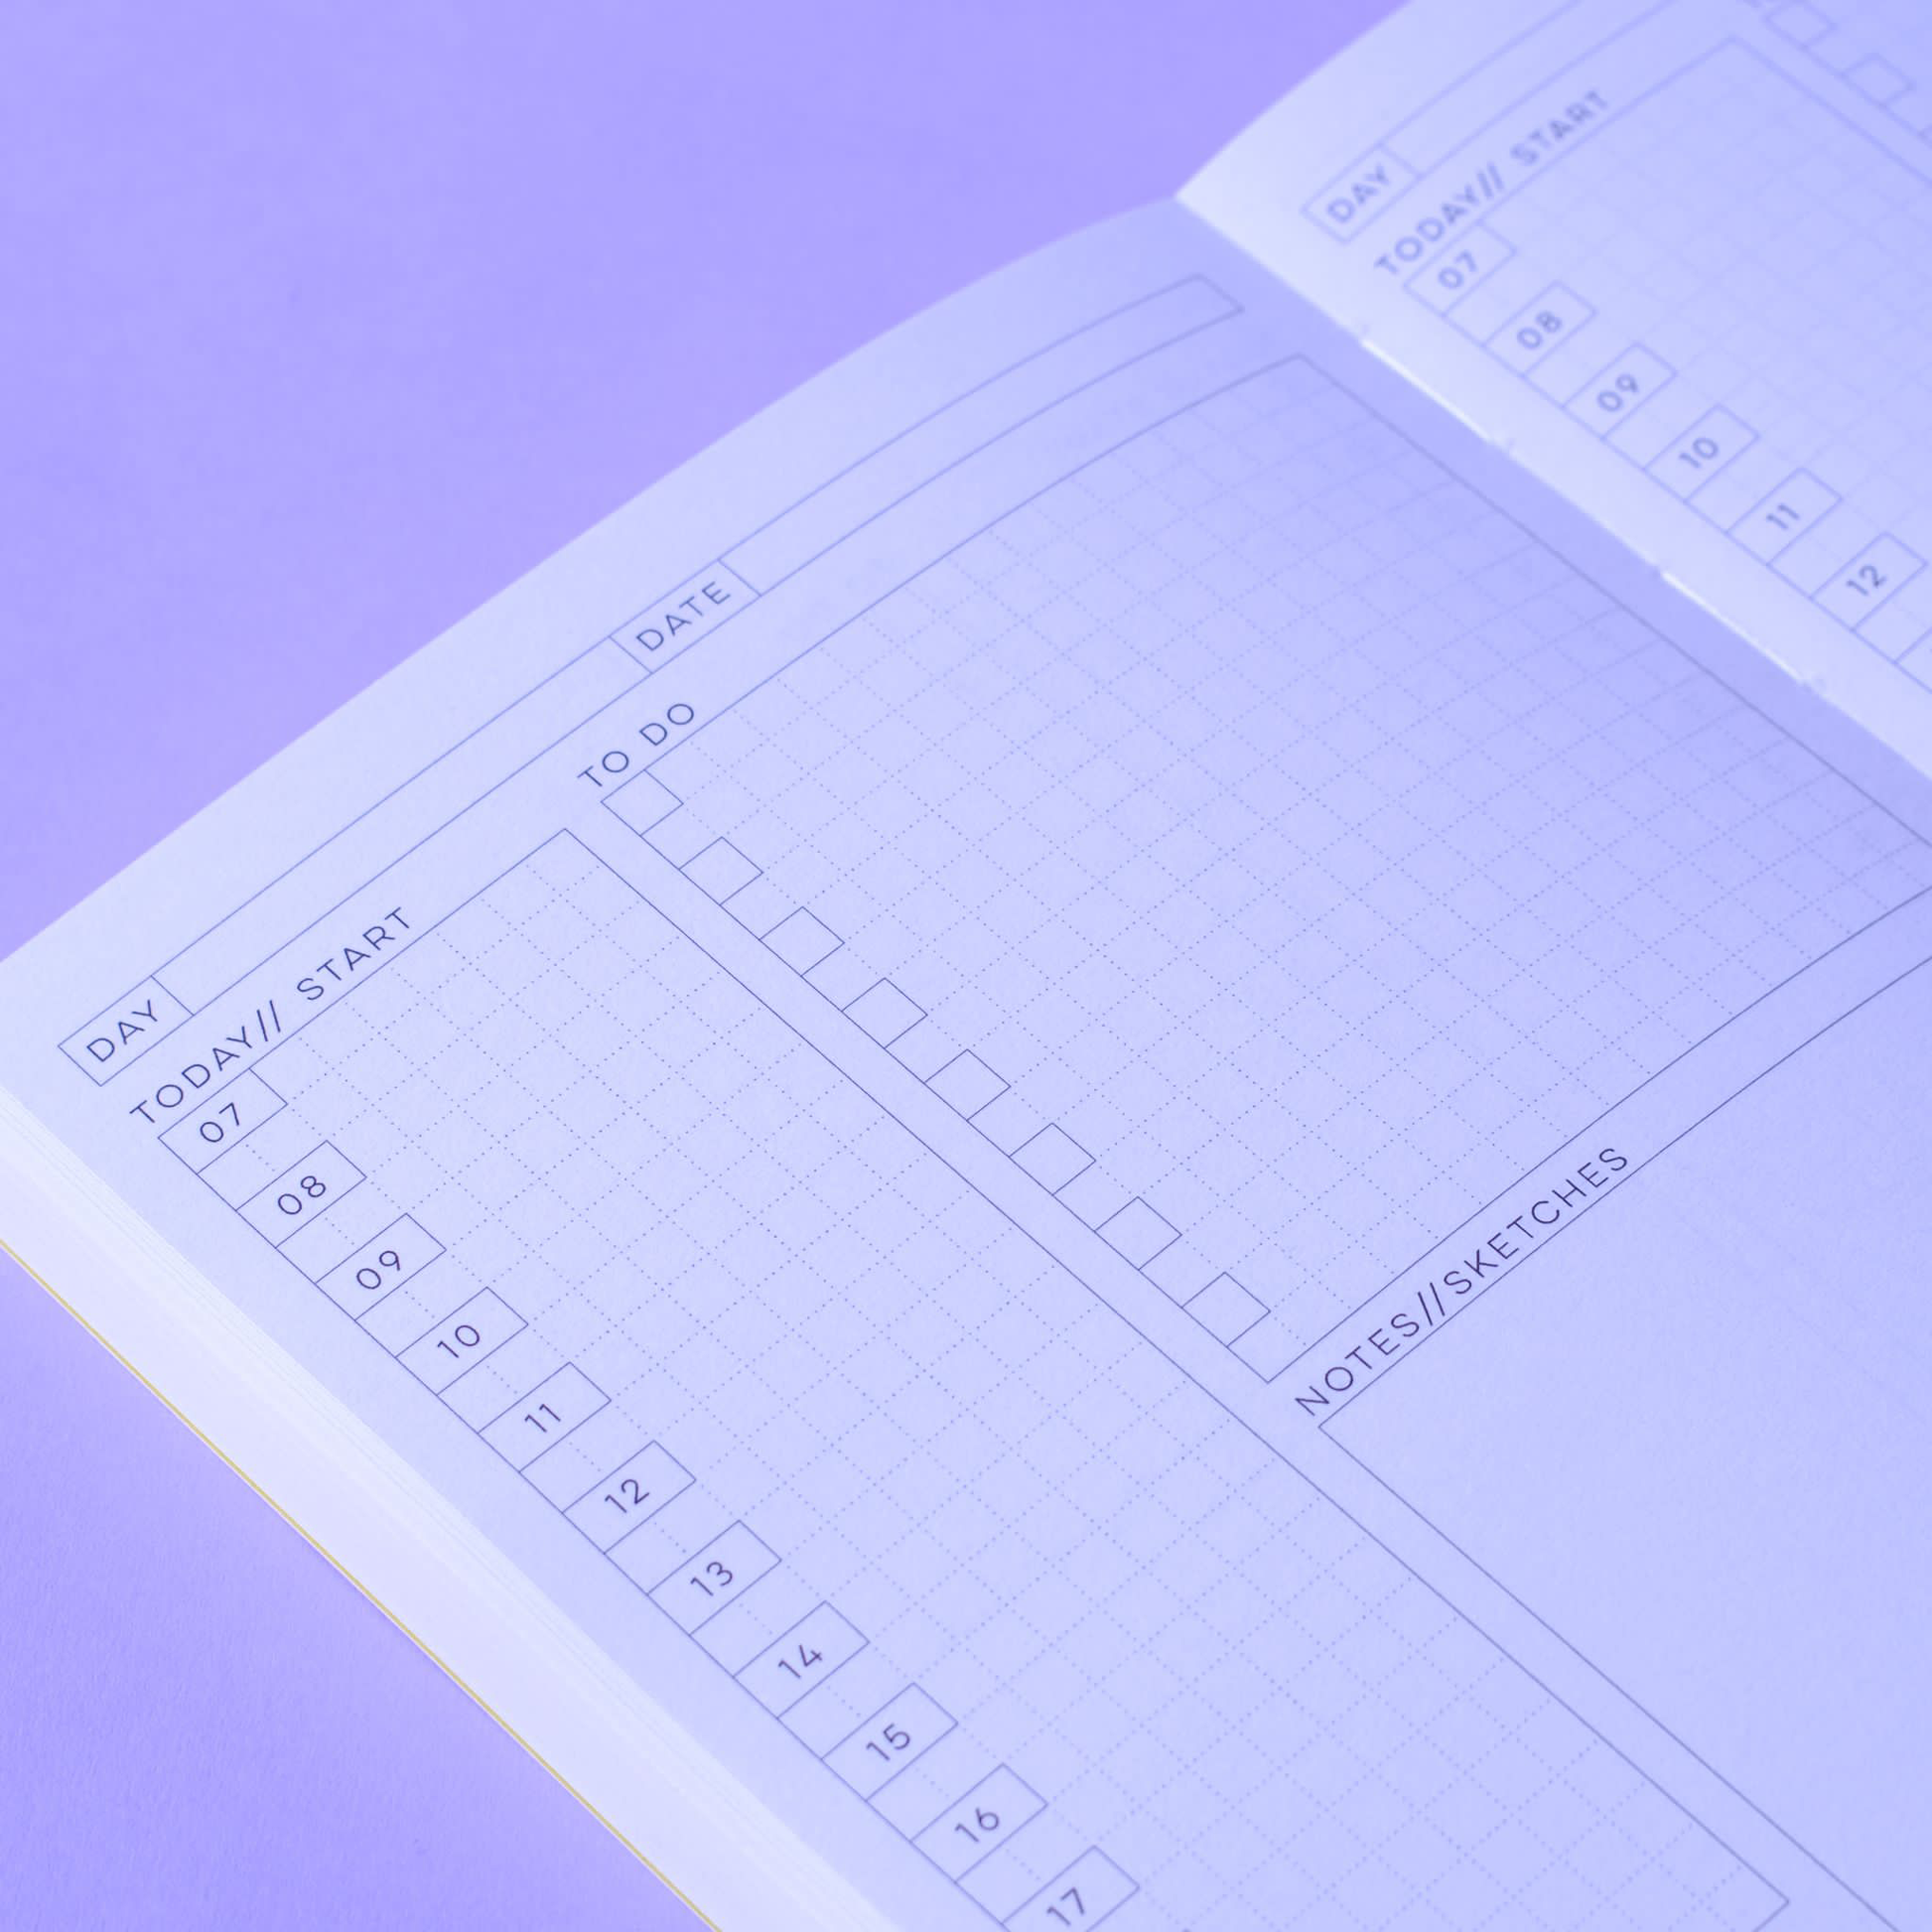 Daily undated planner